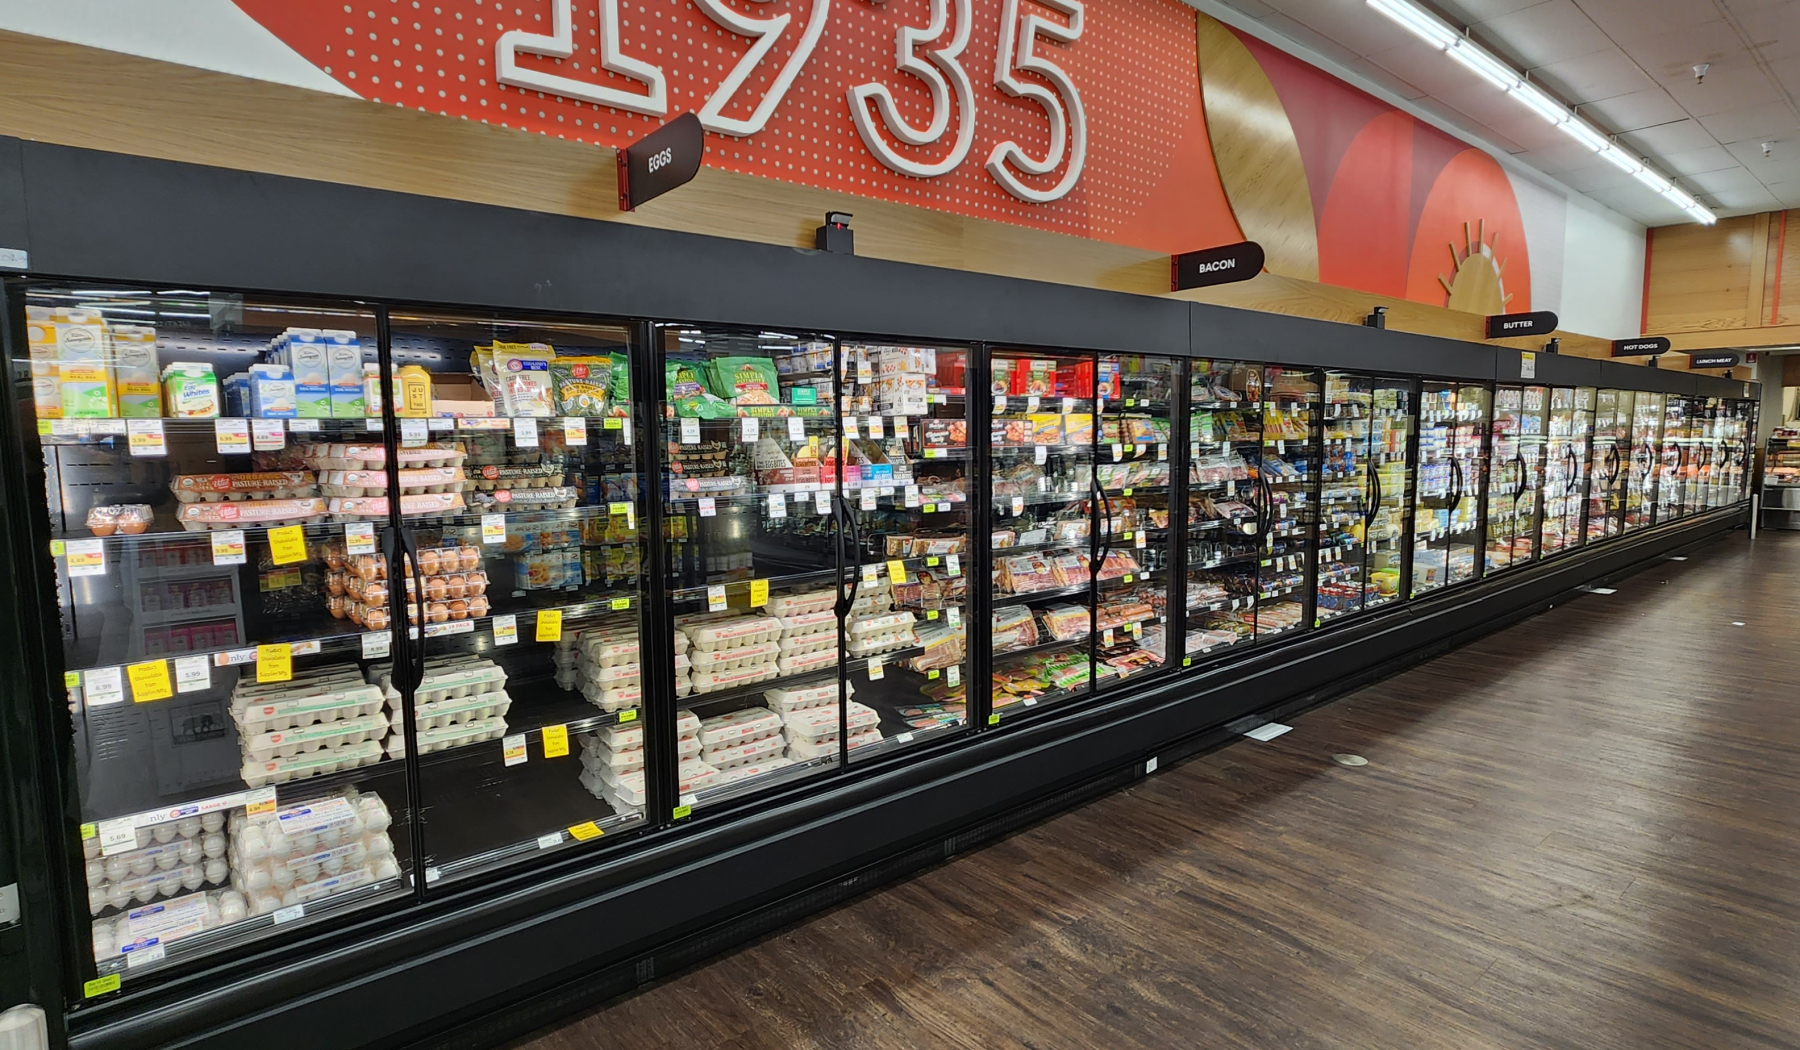 Refrigerated case doors in grocery store.